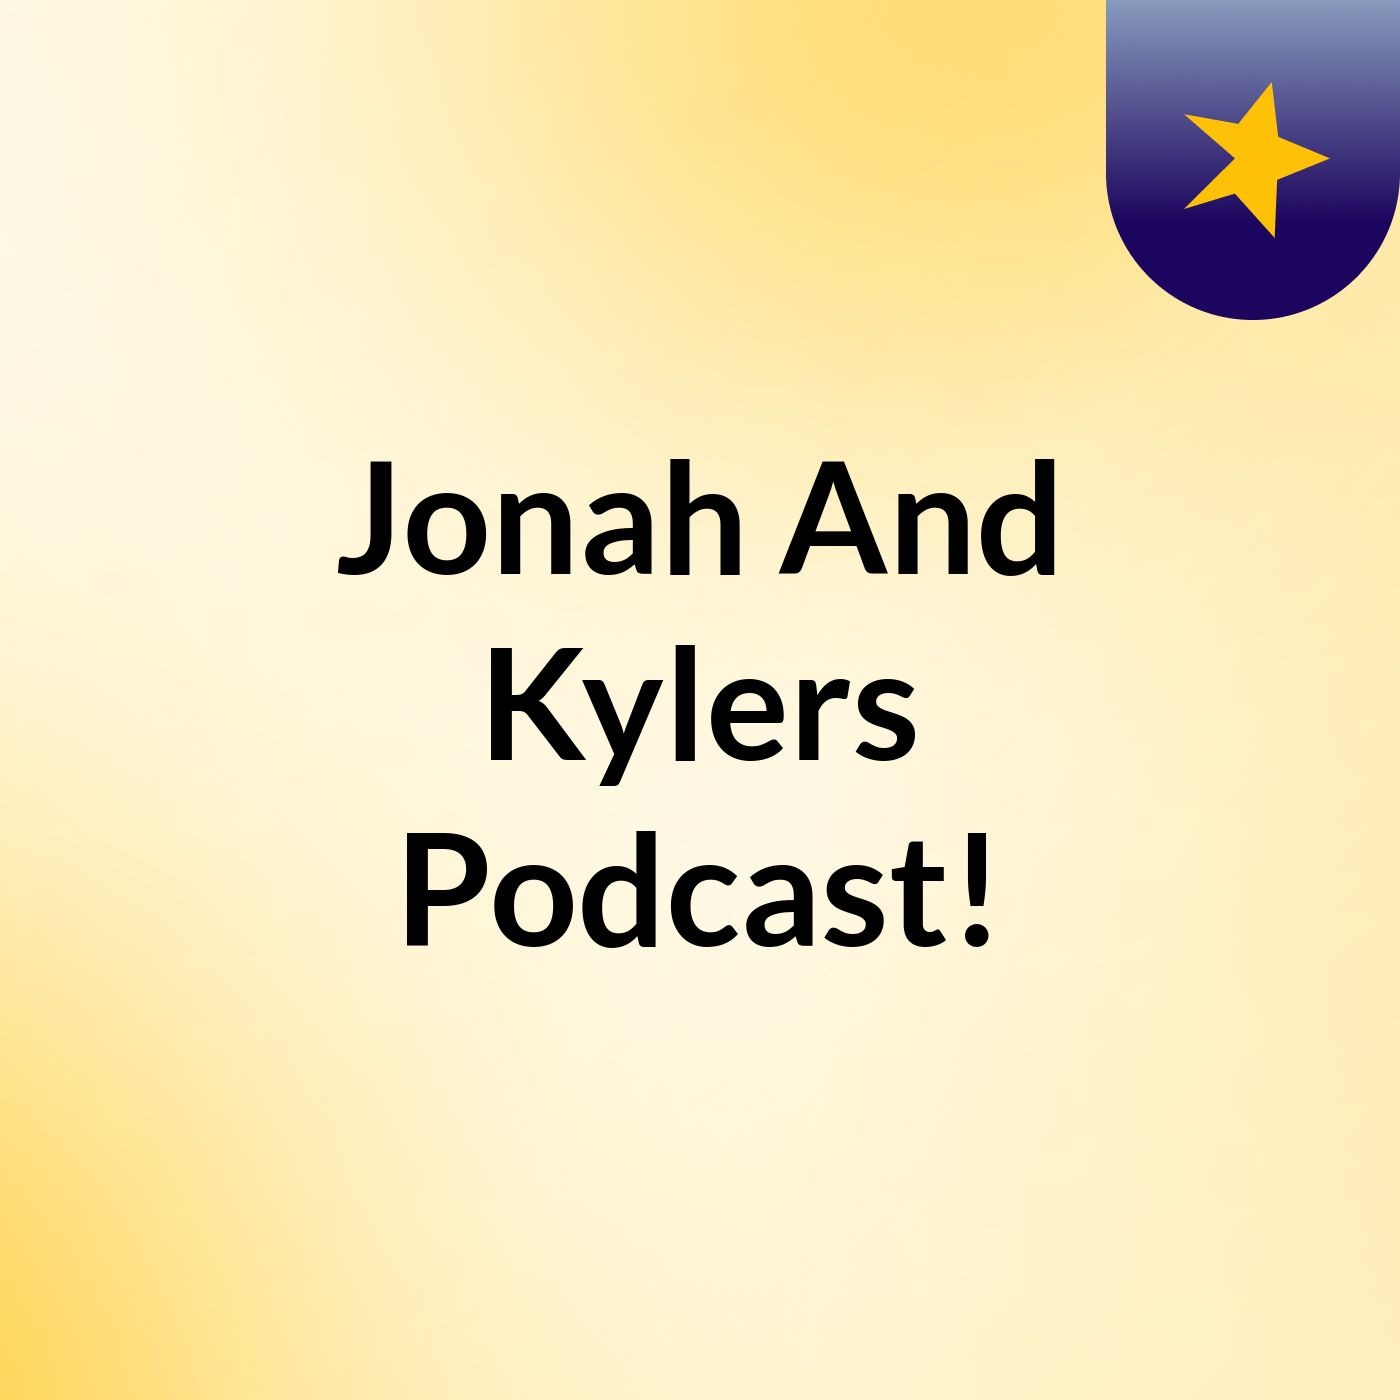 Jonah And Kylers Podcast!